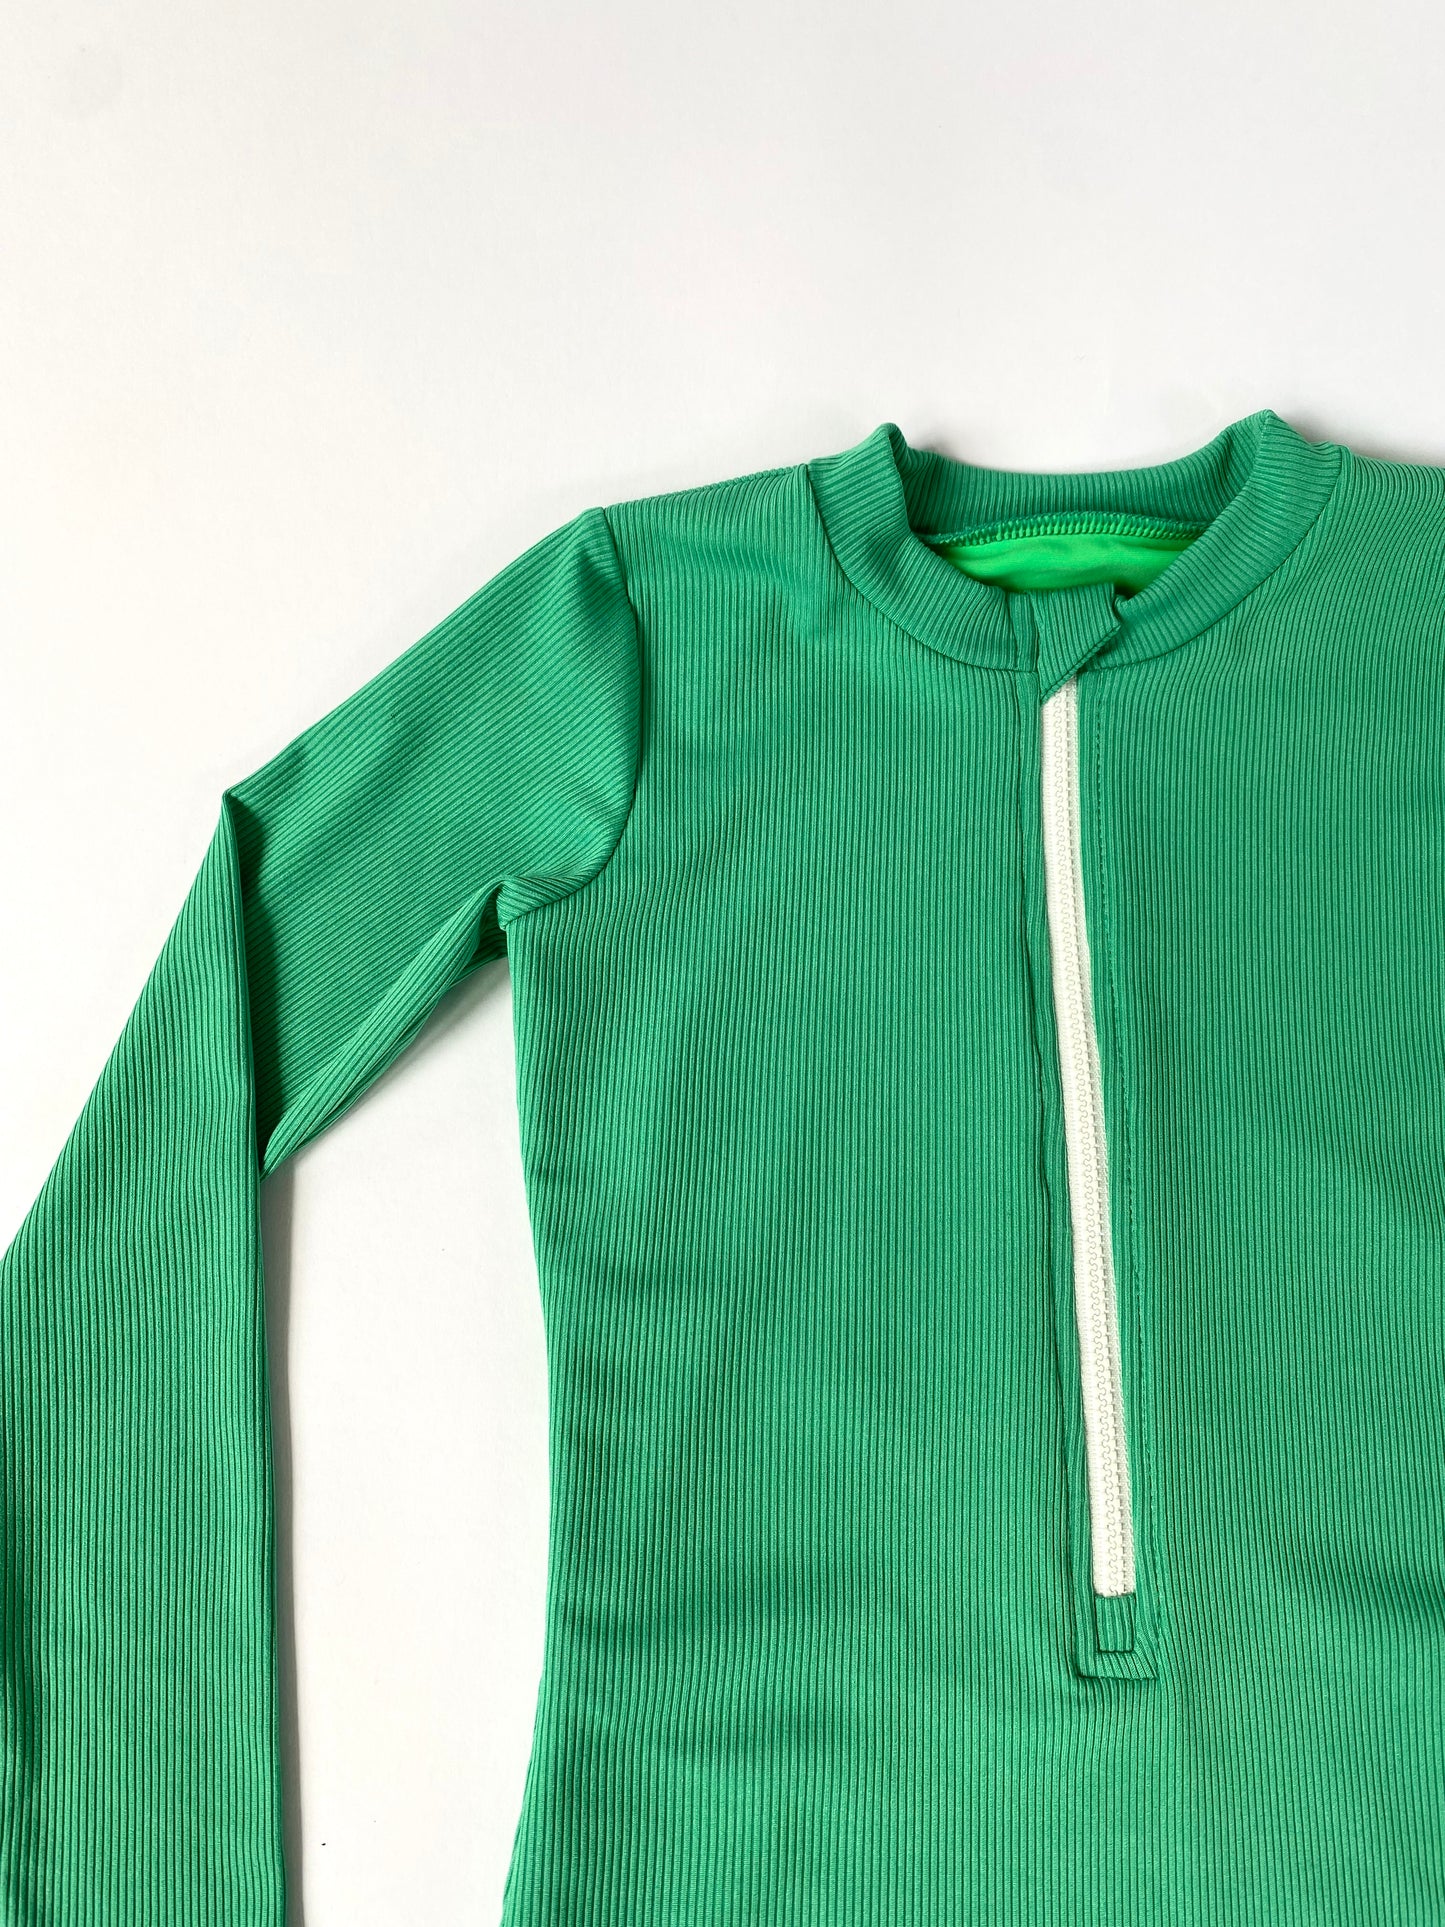 Sahara Ribbed One Piece Zip Up in Emerald